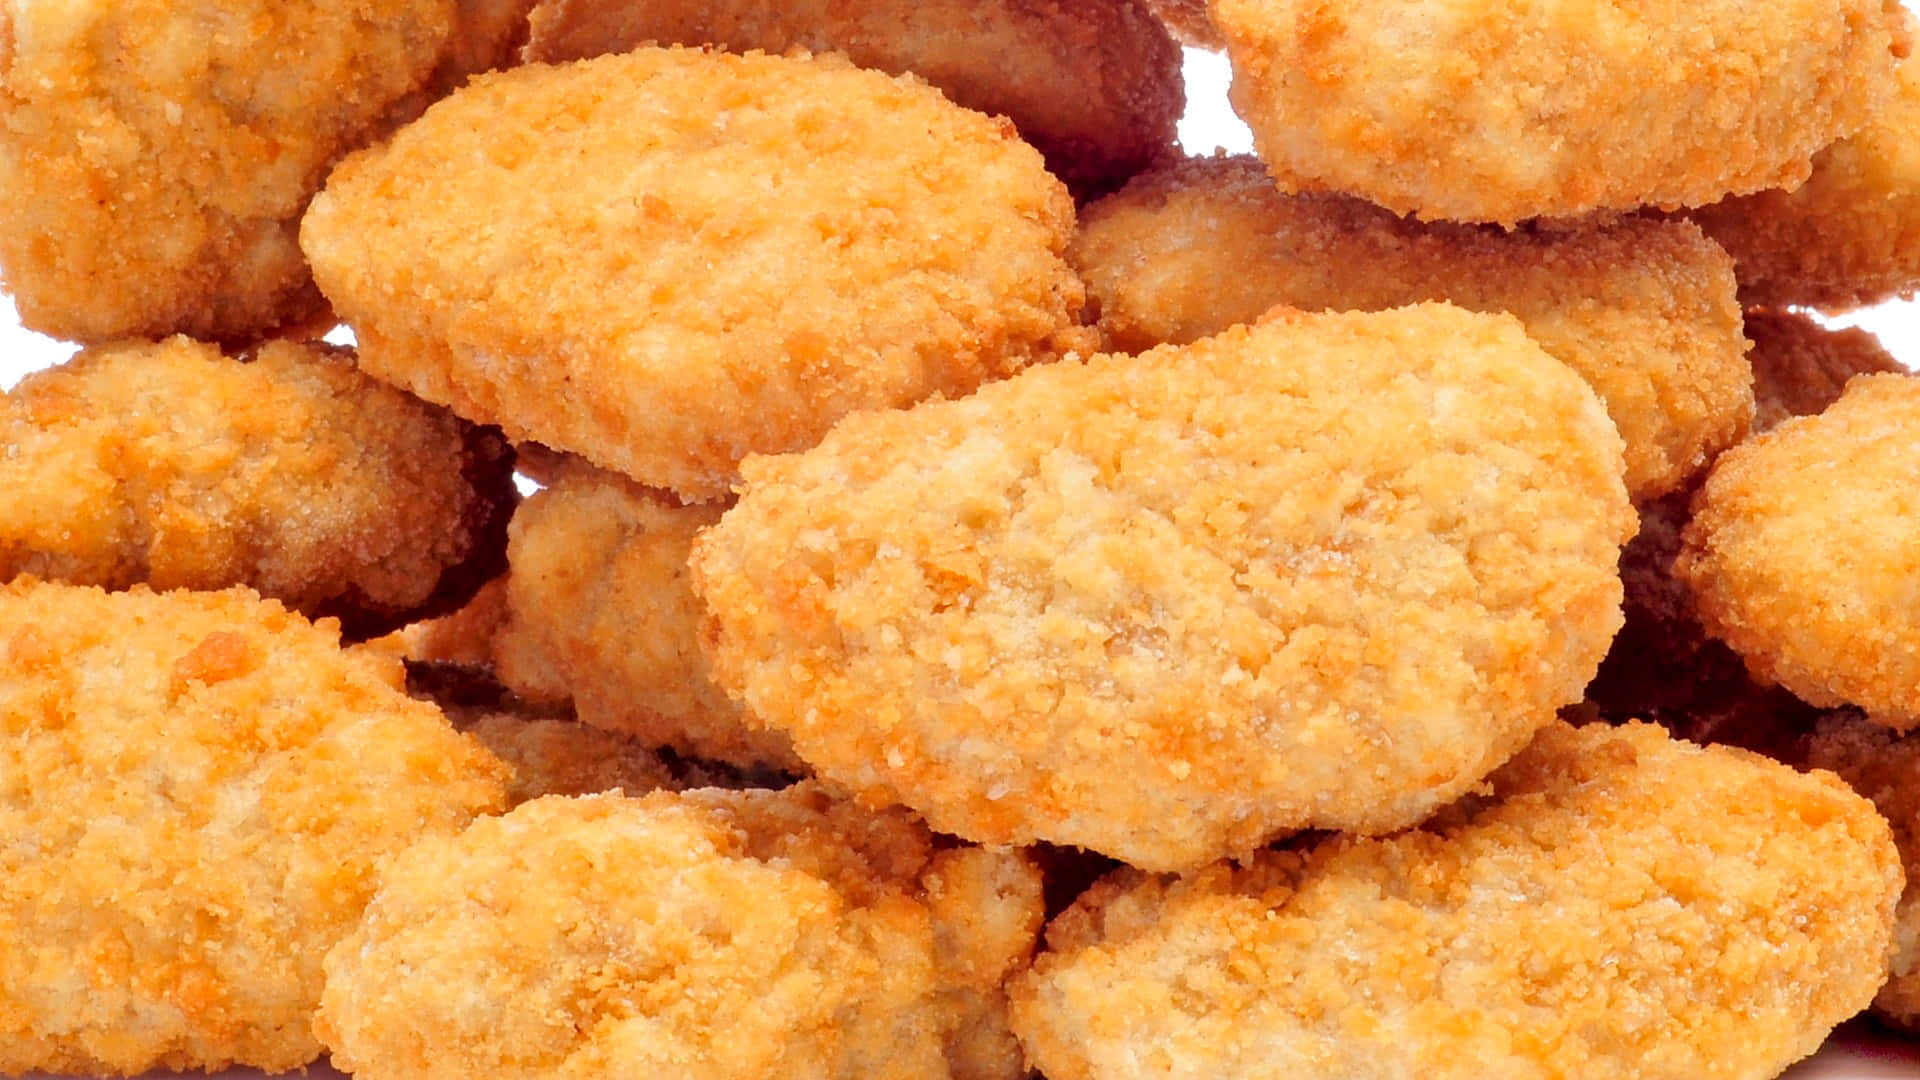 A delicious plate of golden fried chicken nuggets. Wallpaper